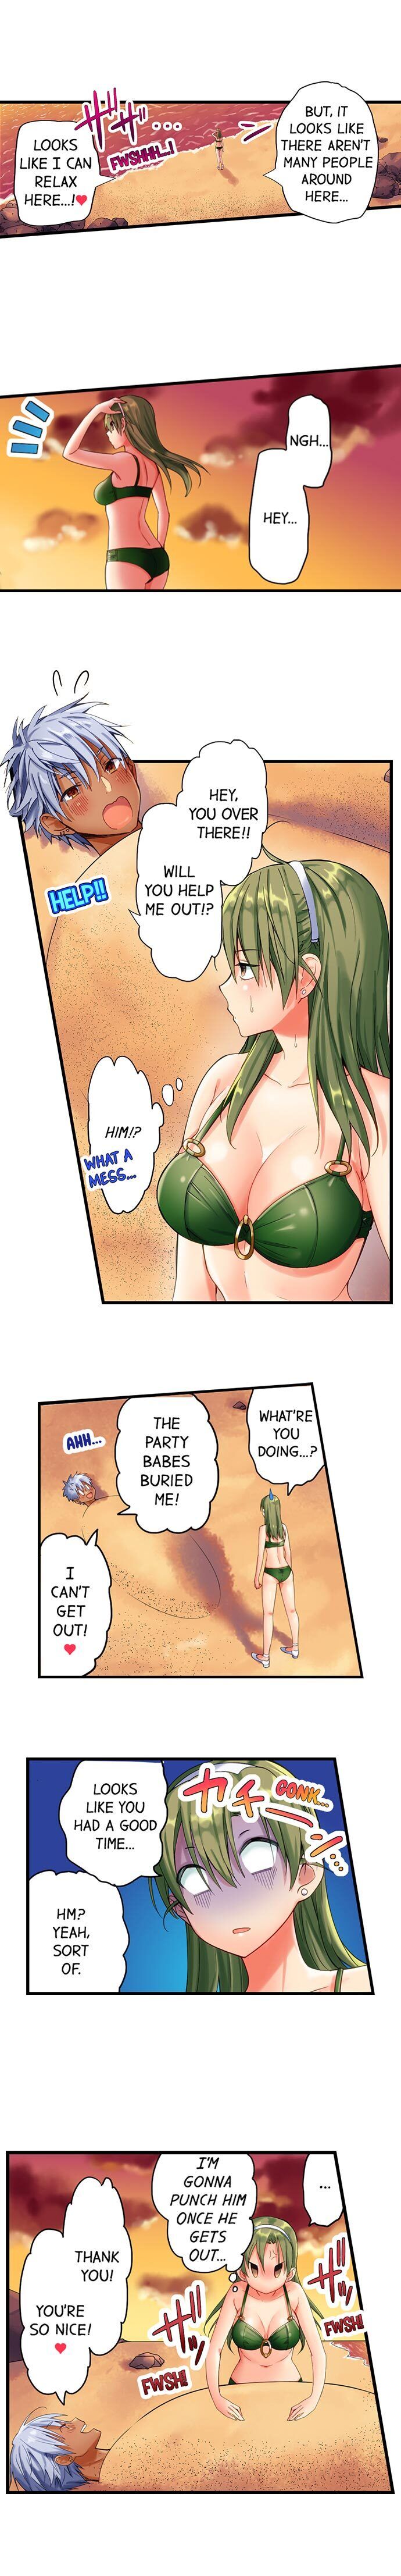 A Chaste Girl’s Climax at a Nudist Beach - Chapter 2 Page 6